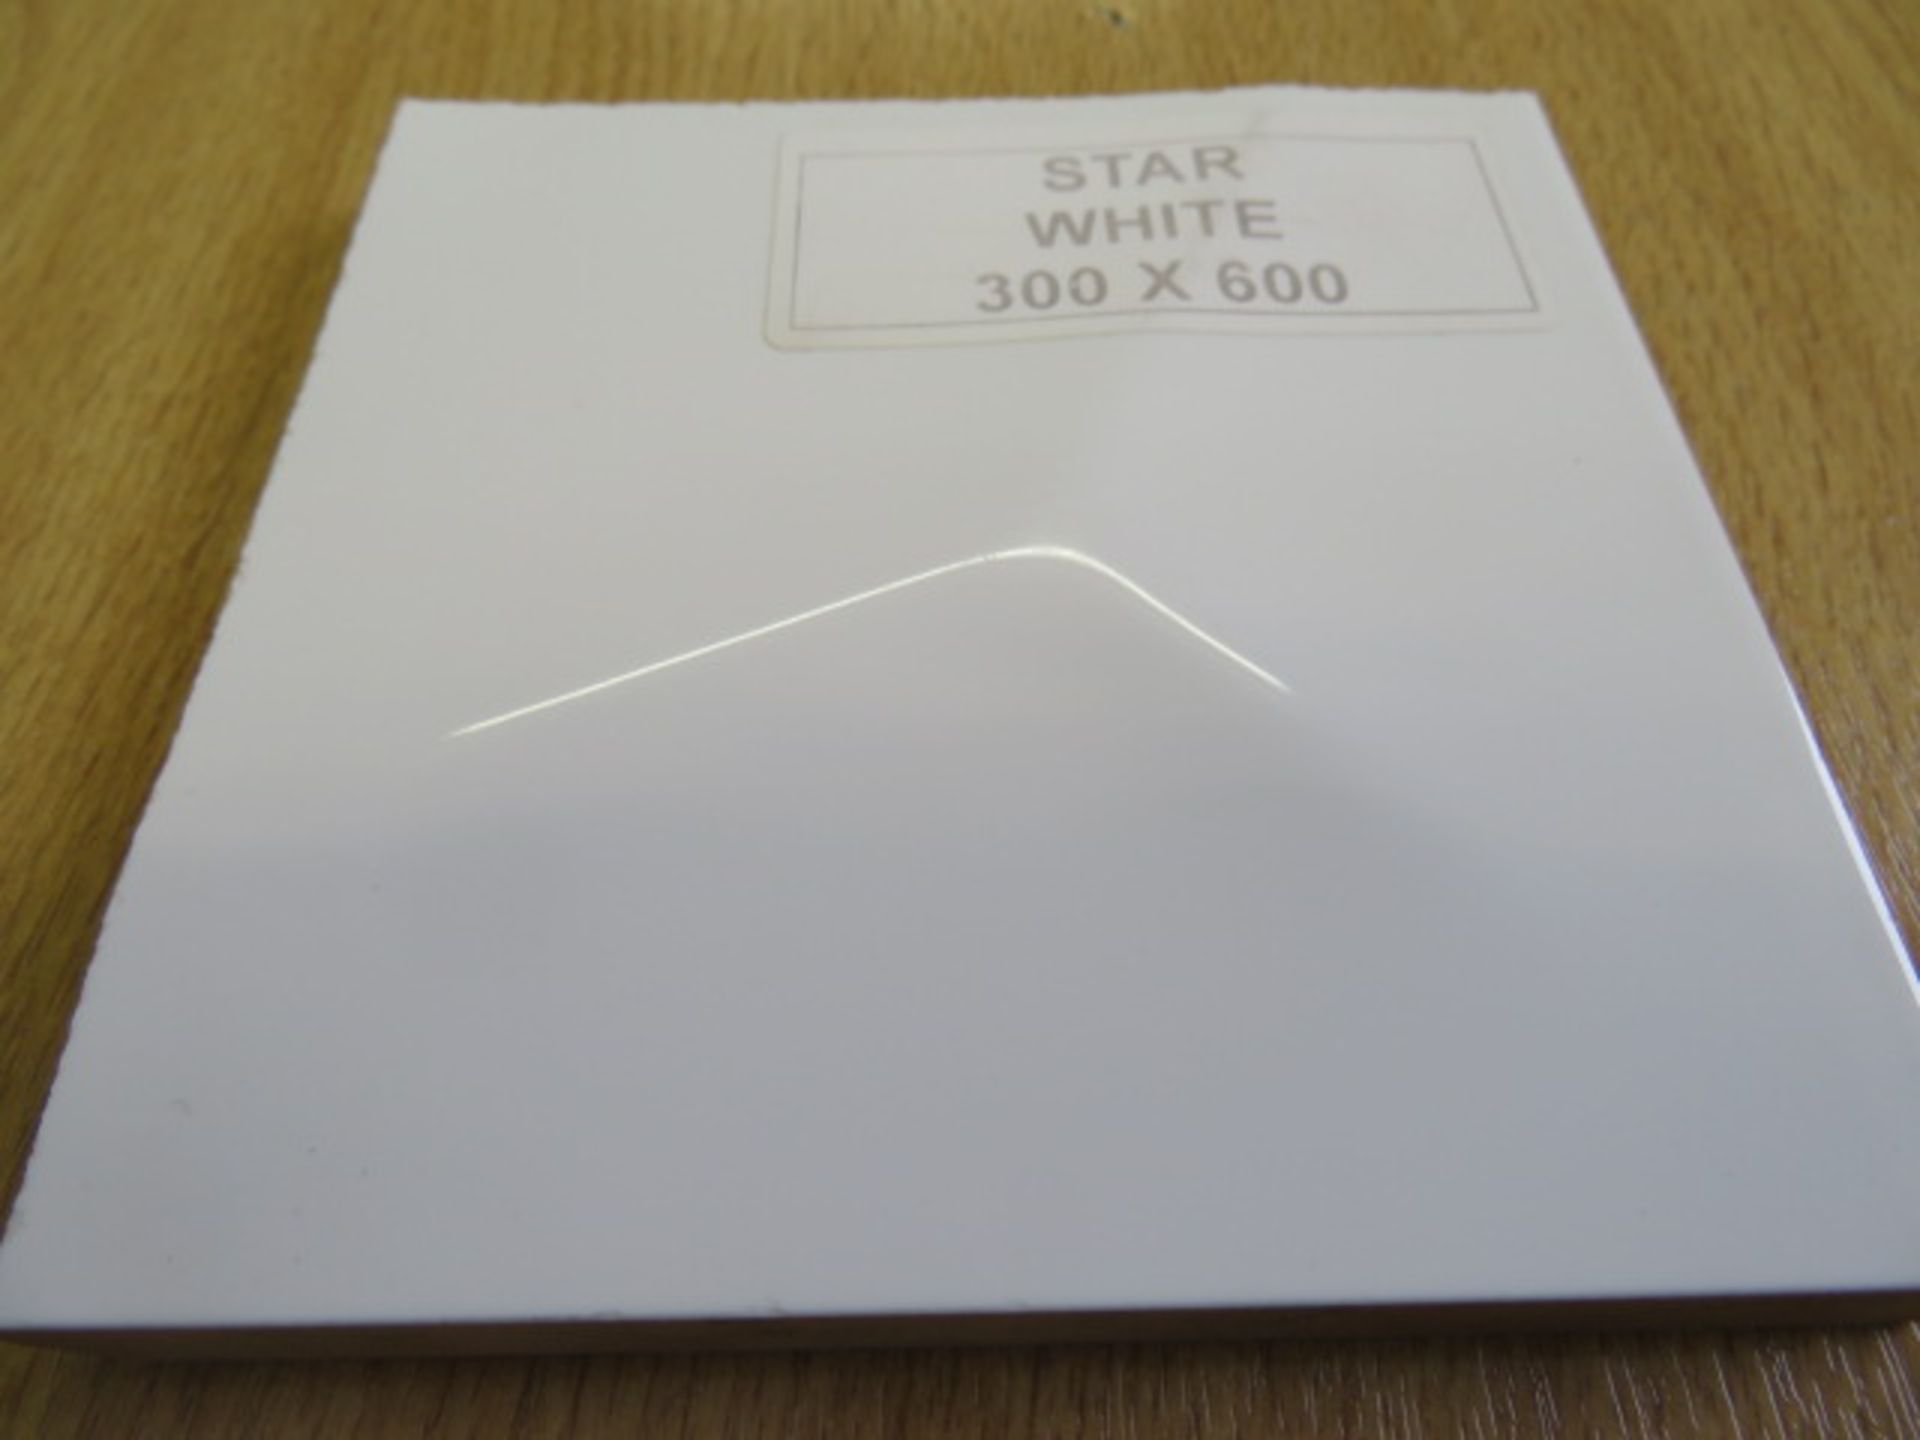 NEW 9 Square Meters of 3D White Star Effect Wall and Floor Tiles. 300x600mm per tile. 8mm Thick... - Image 4 of 6